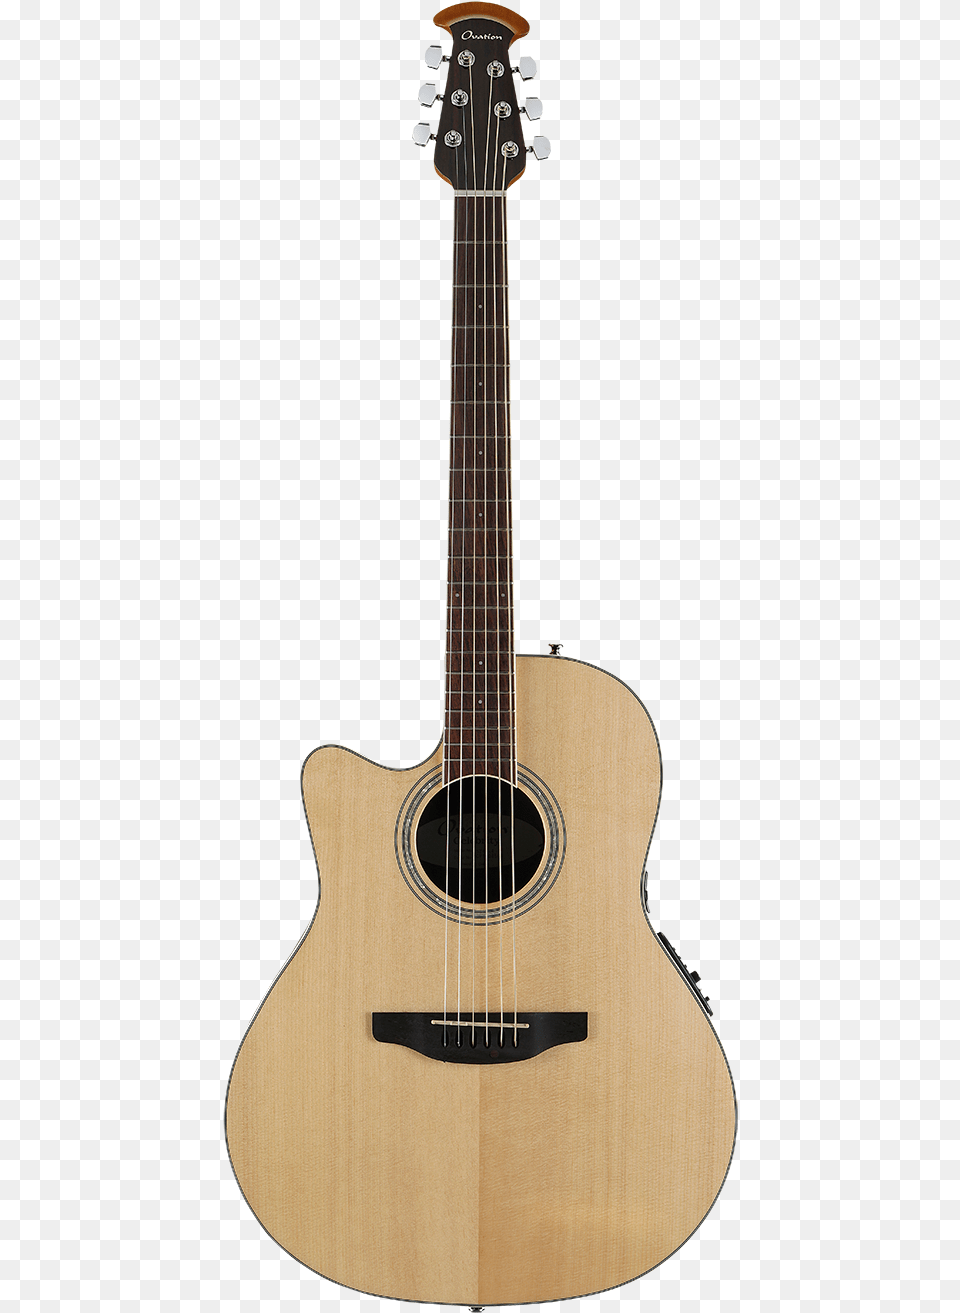 Celebrity Specialty Lefty Guitar Acoustic, Musical Instrument, Bass Guitar Png